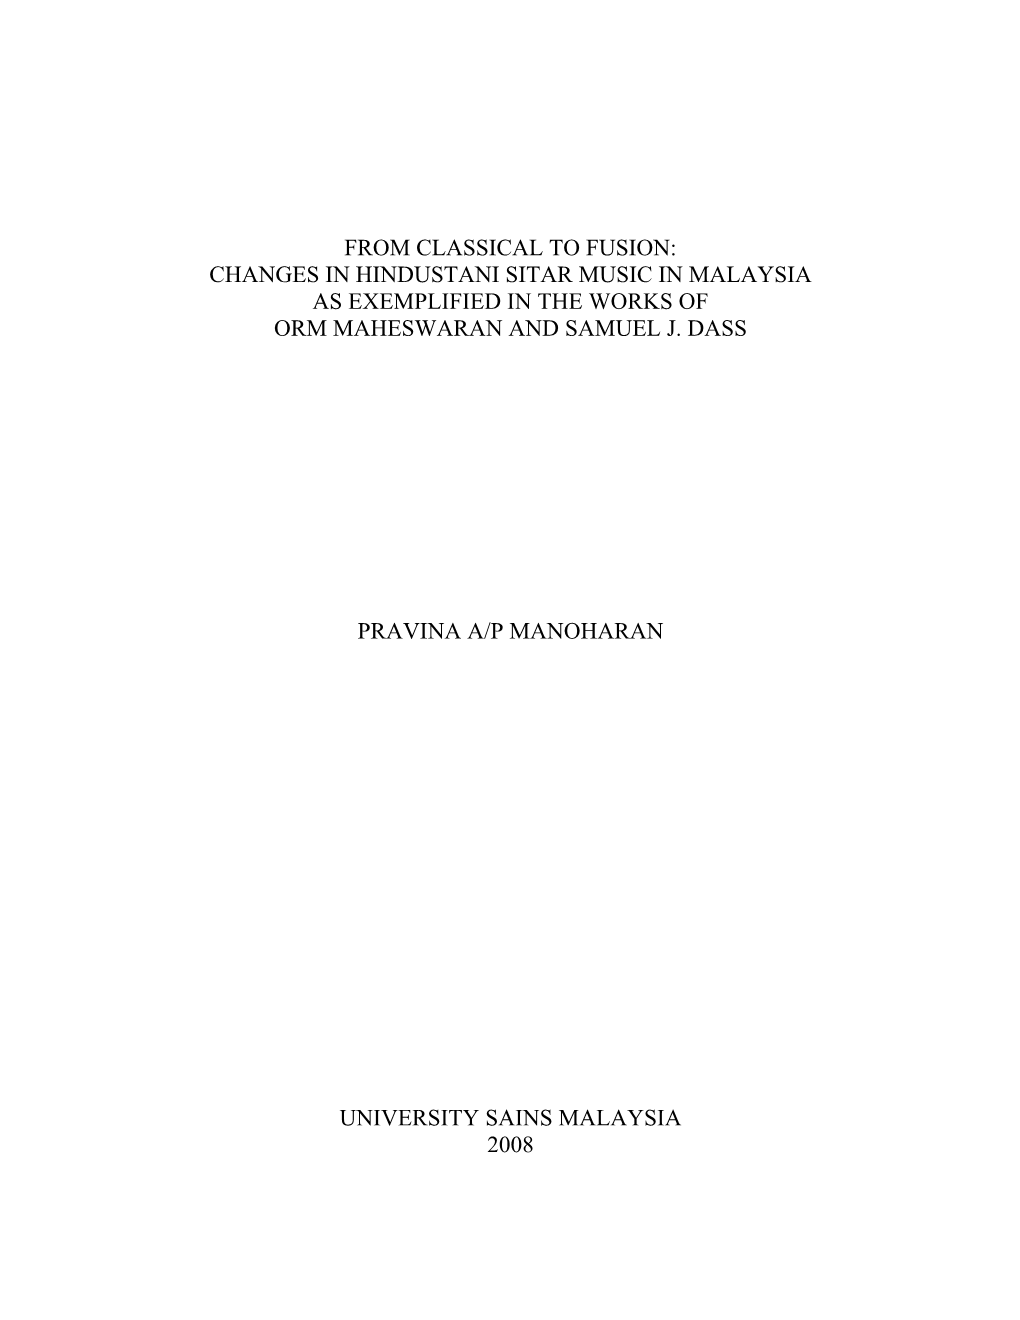 From Classical to Fusion: Changes in Hindustani Sitar Music in Malaysia As Exemplified in the Works of Orm Maheswaran and Samuel J